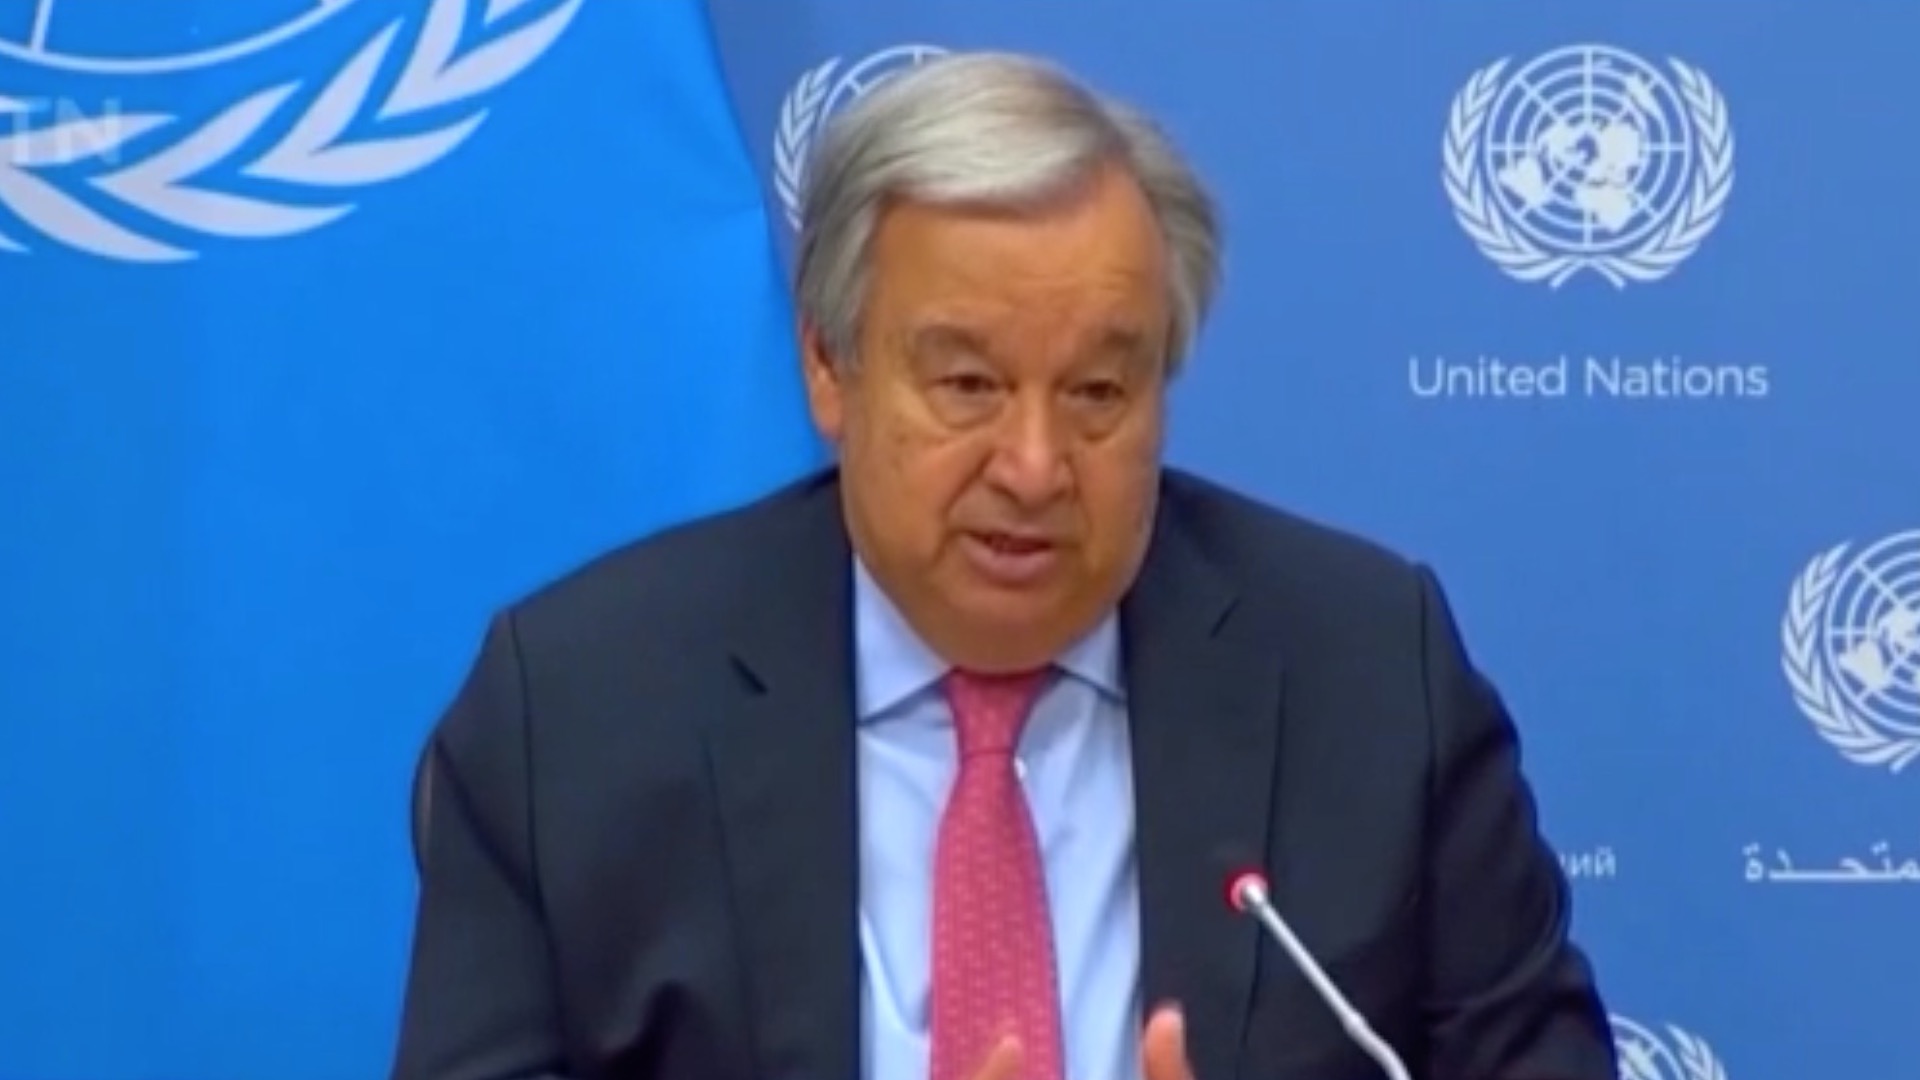 UN chief reiterates support for one-China principle